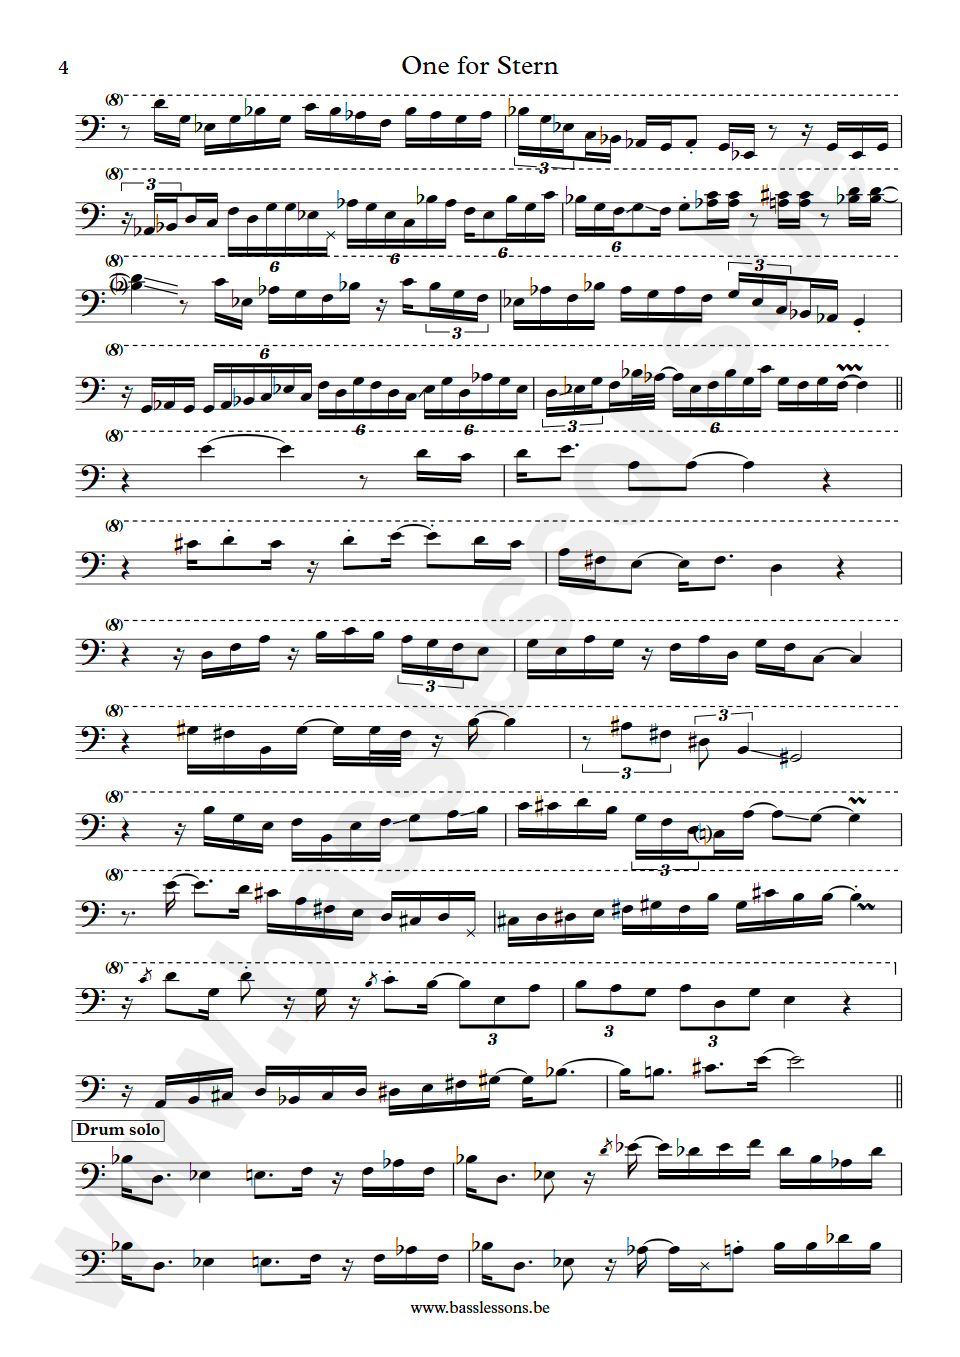 Cab - One for stern bass transcription